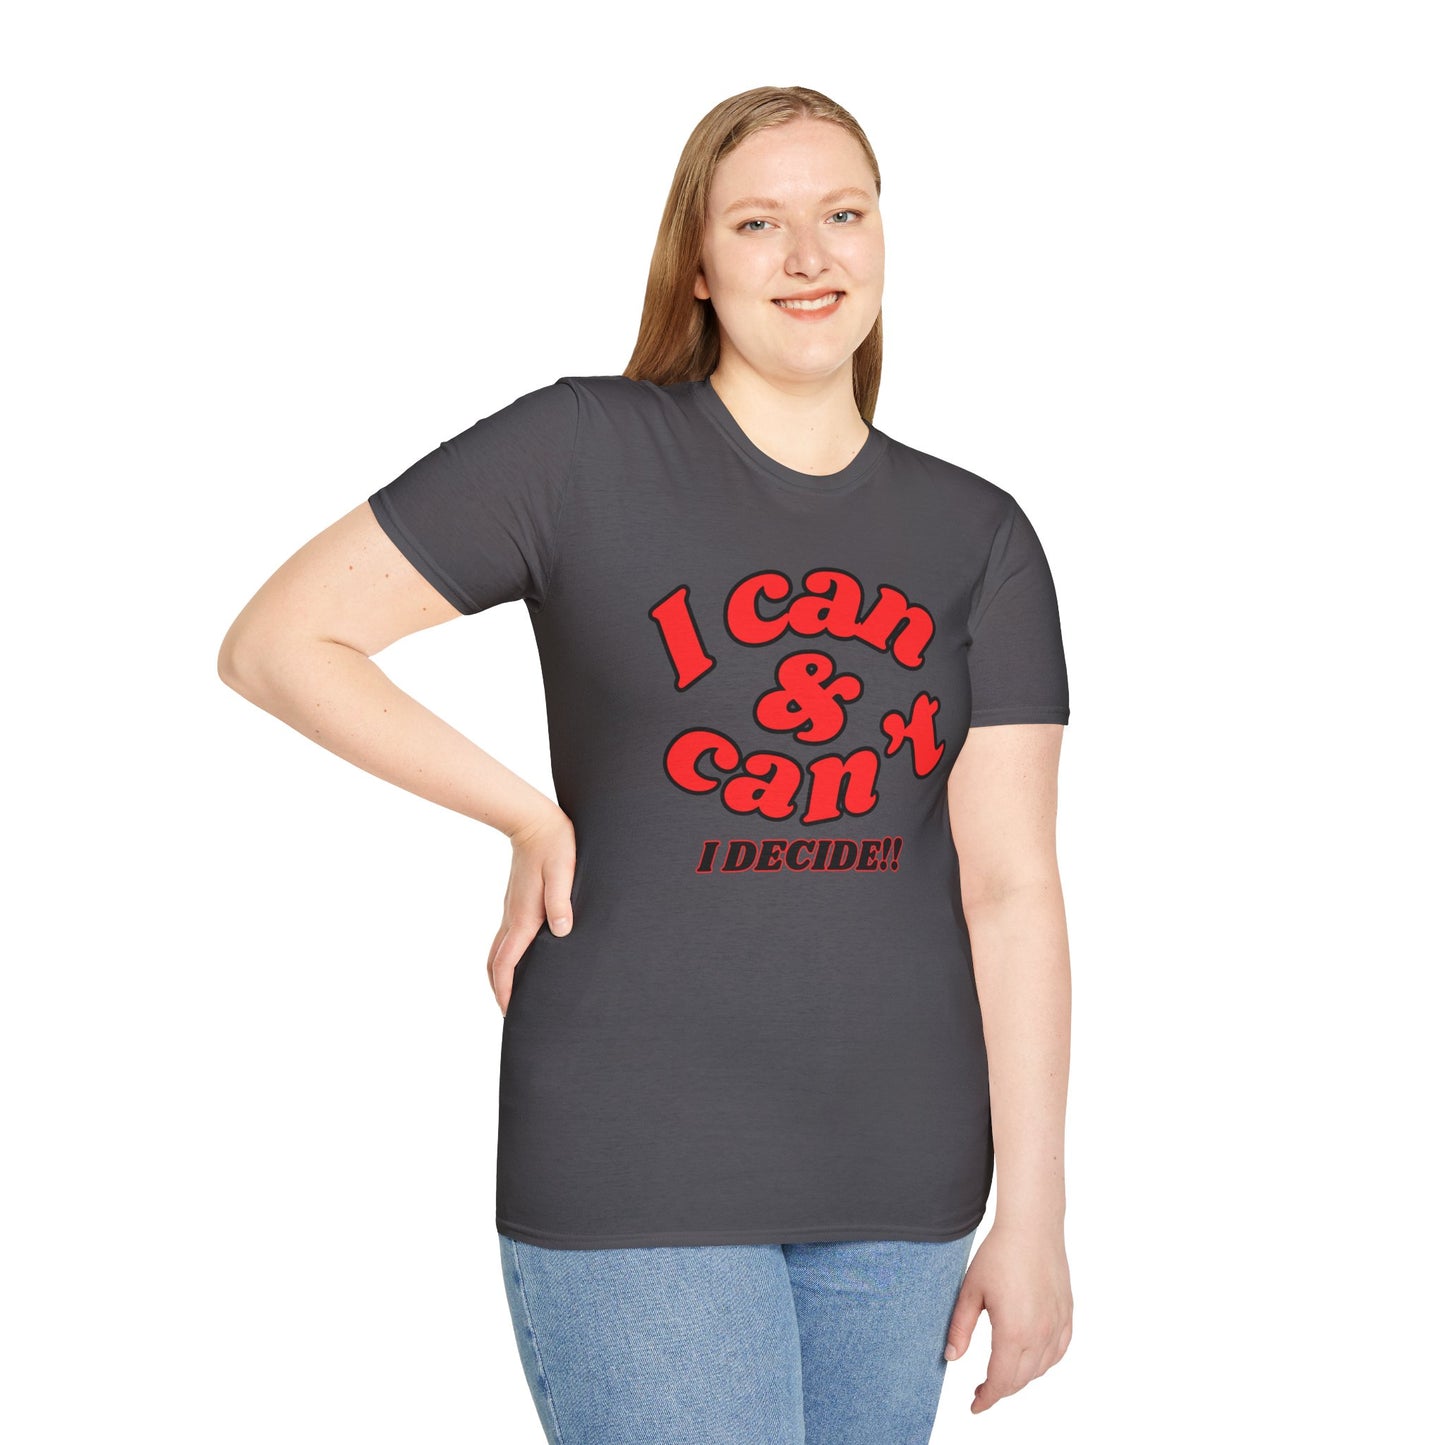 I Can & Can't- Unisex Softstyle T-Shirt